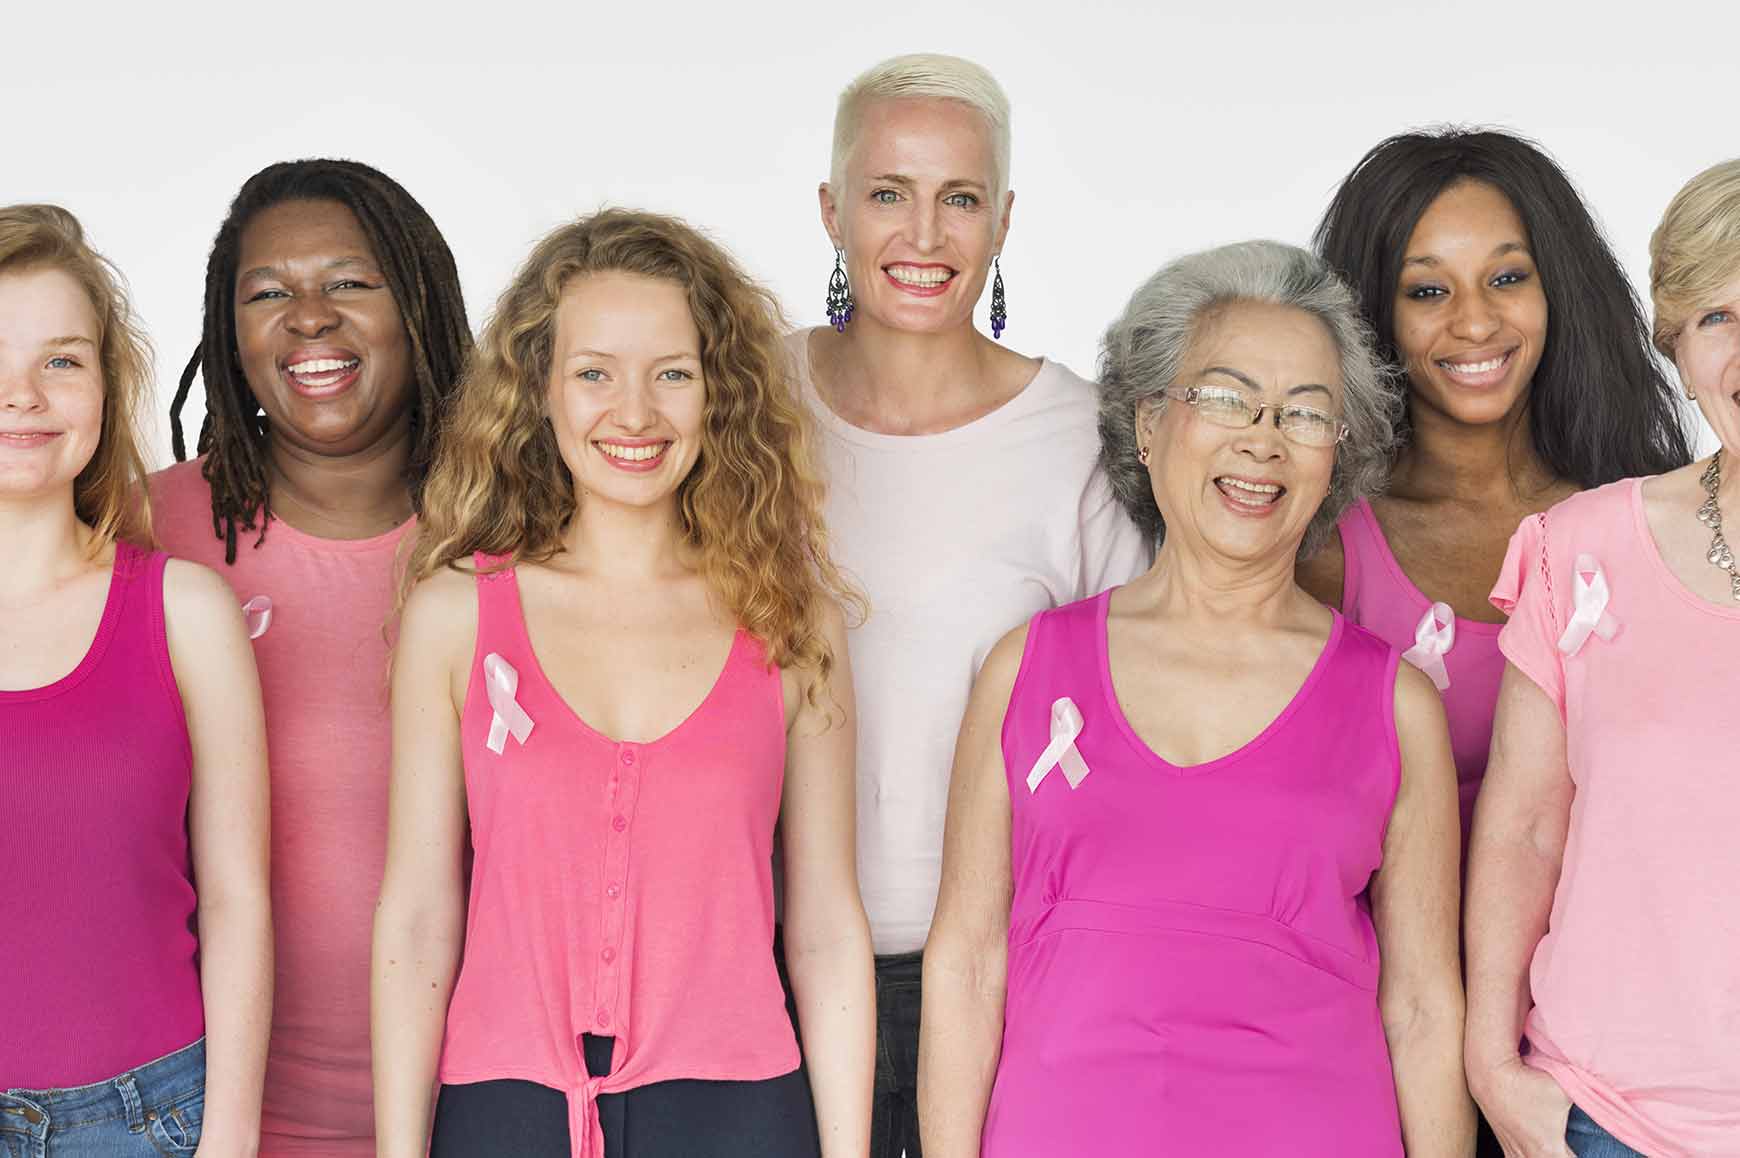 Breast reconstruction for breast cancer survivors comprises several operations to achieve the best results possible. Contact Dr. Melissa Marks to find out more.